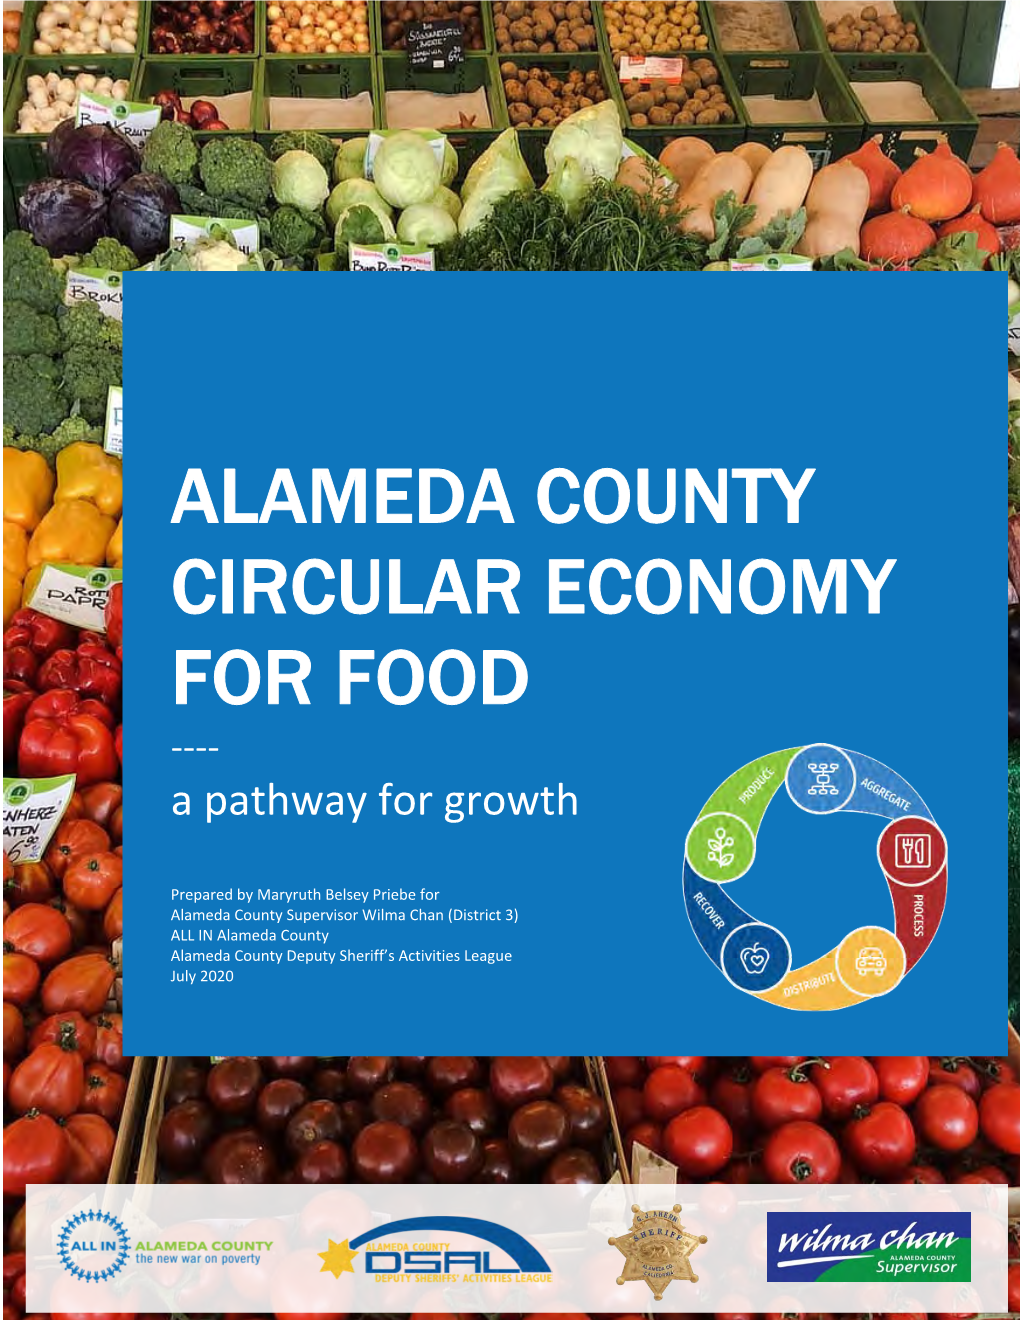 ALAMEDA COUNTY CIRCULAR ECONOMY for FOOD ---- a Pathway for Growth